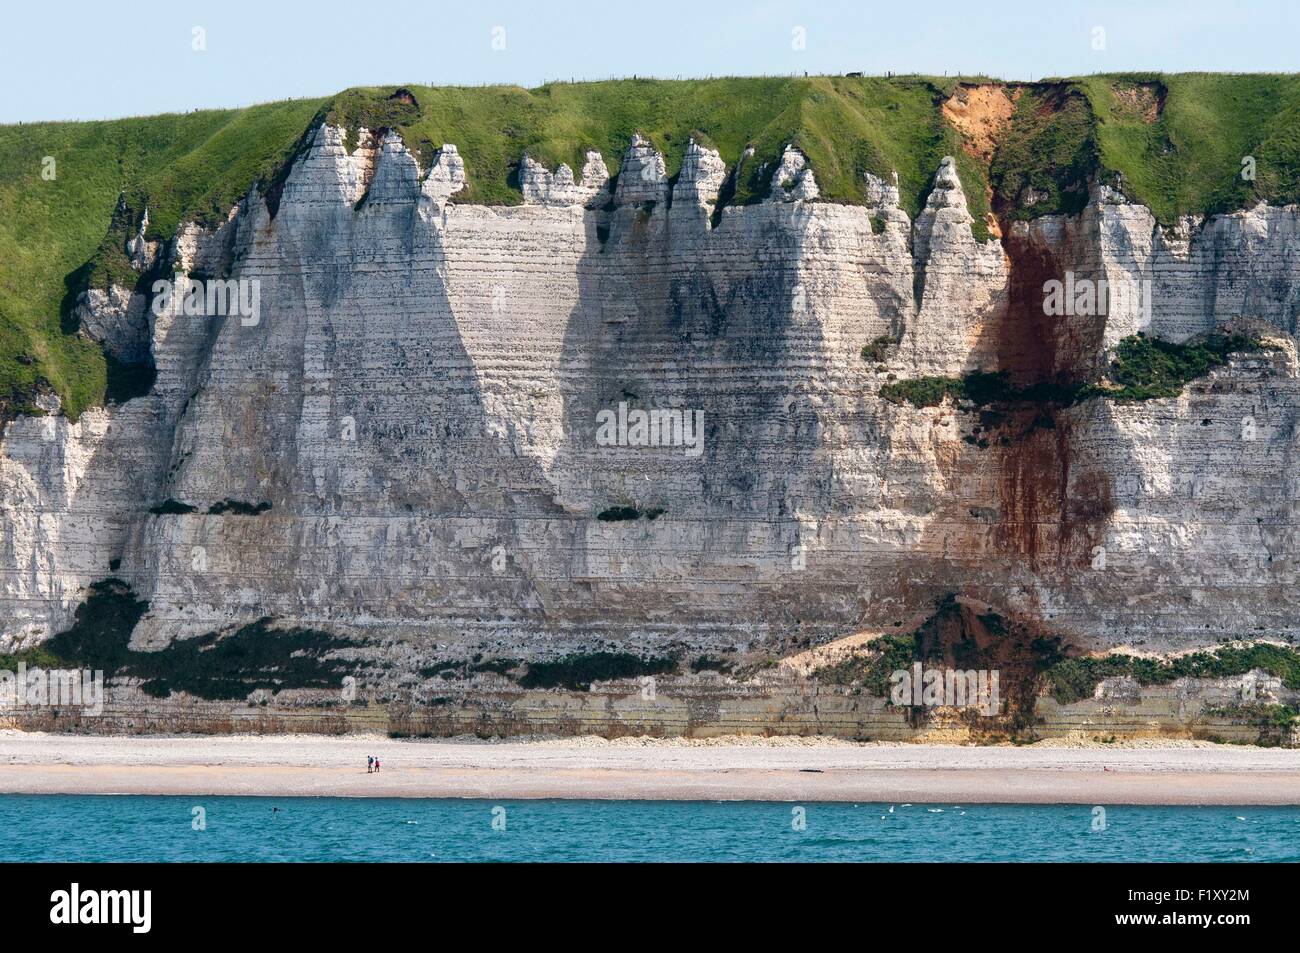 France, Seine Maritime, Pays de Caux, Cote d'Albatre, Fecamp, two people on the beach at the foot of cliffs Stock Photo